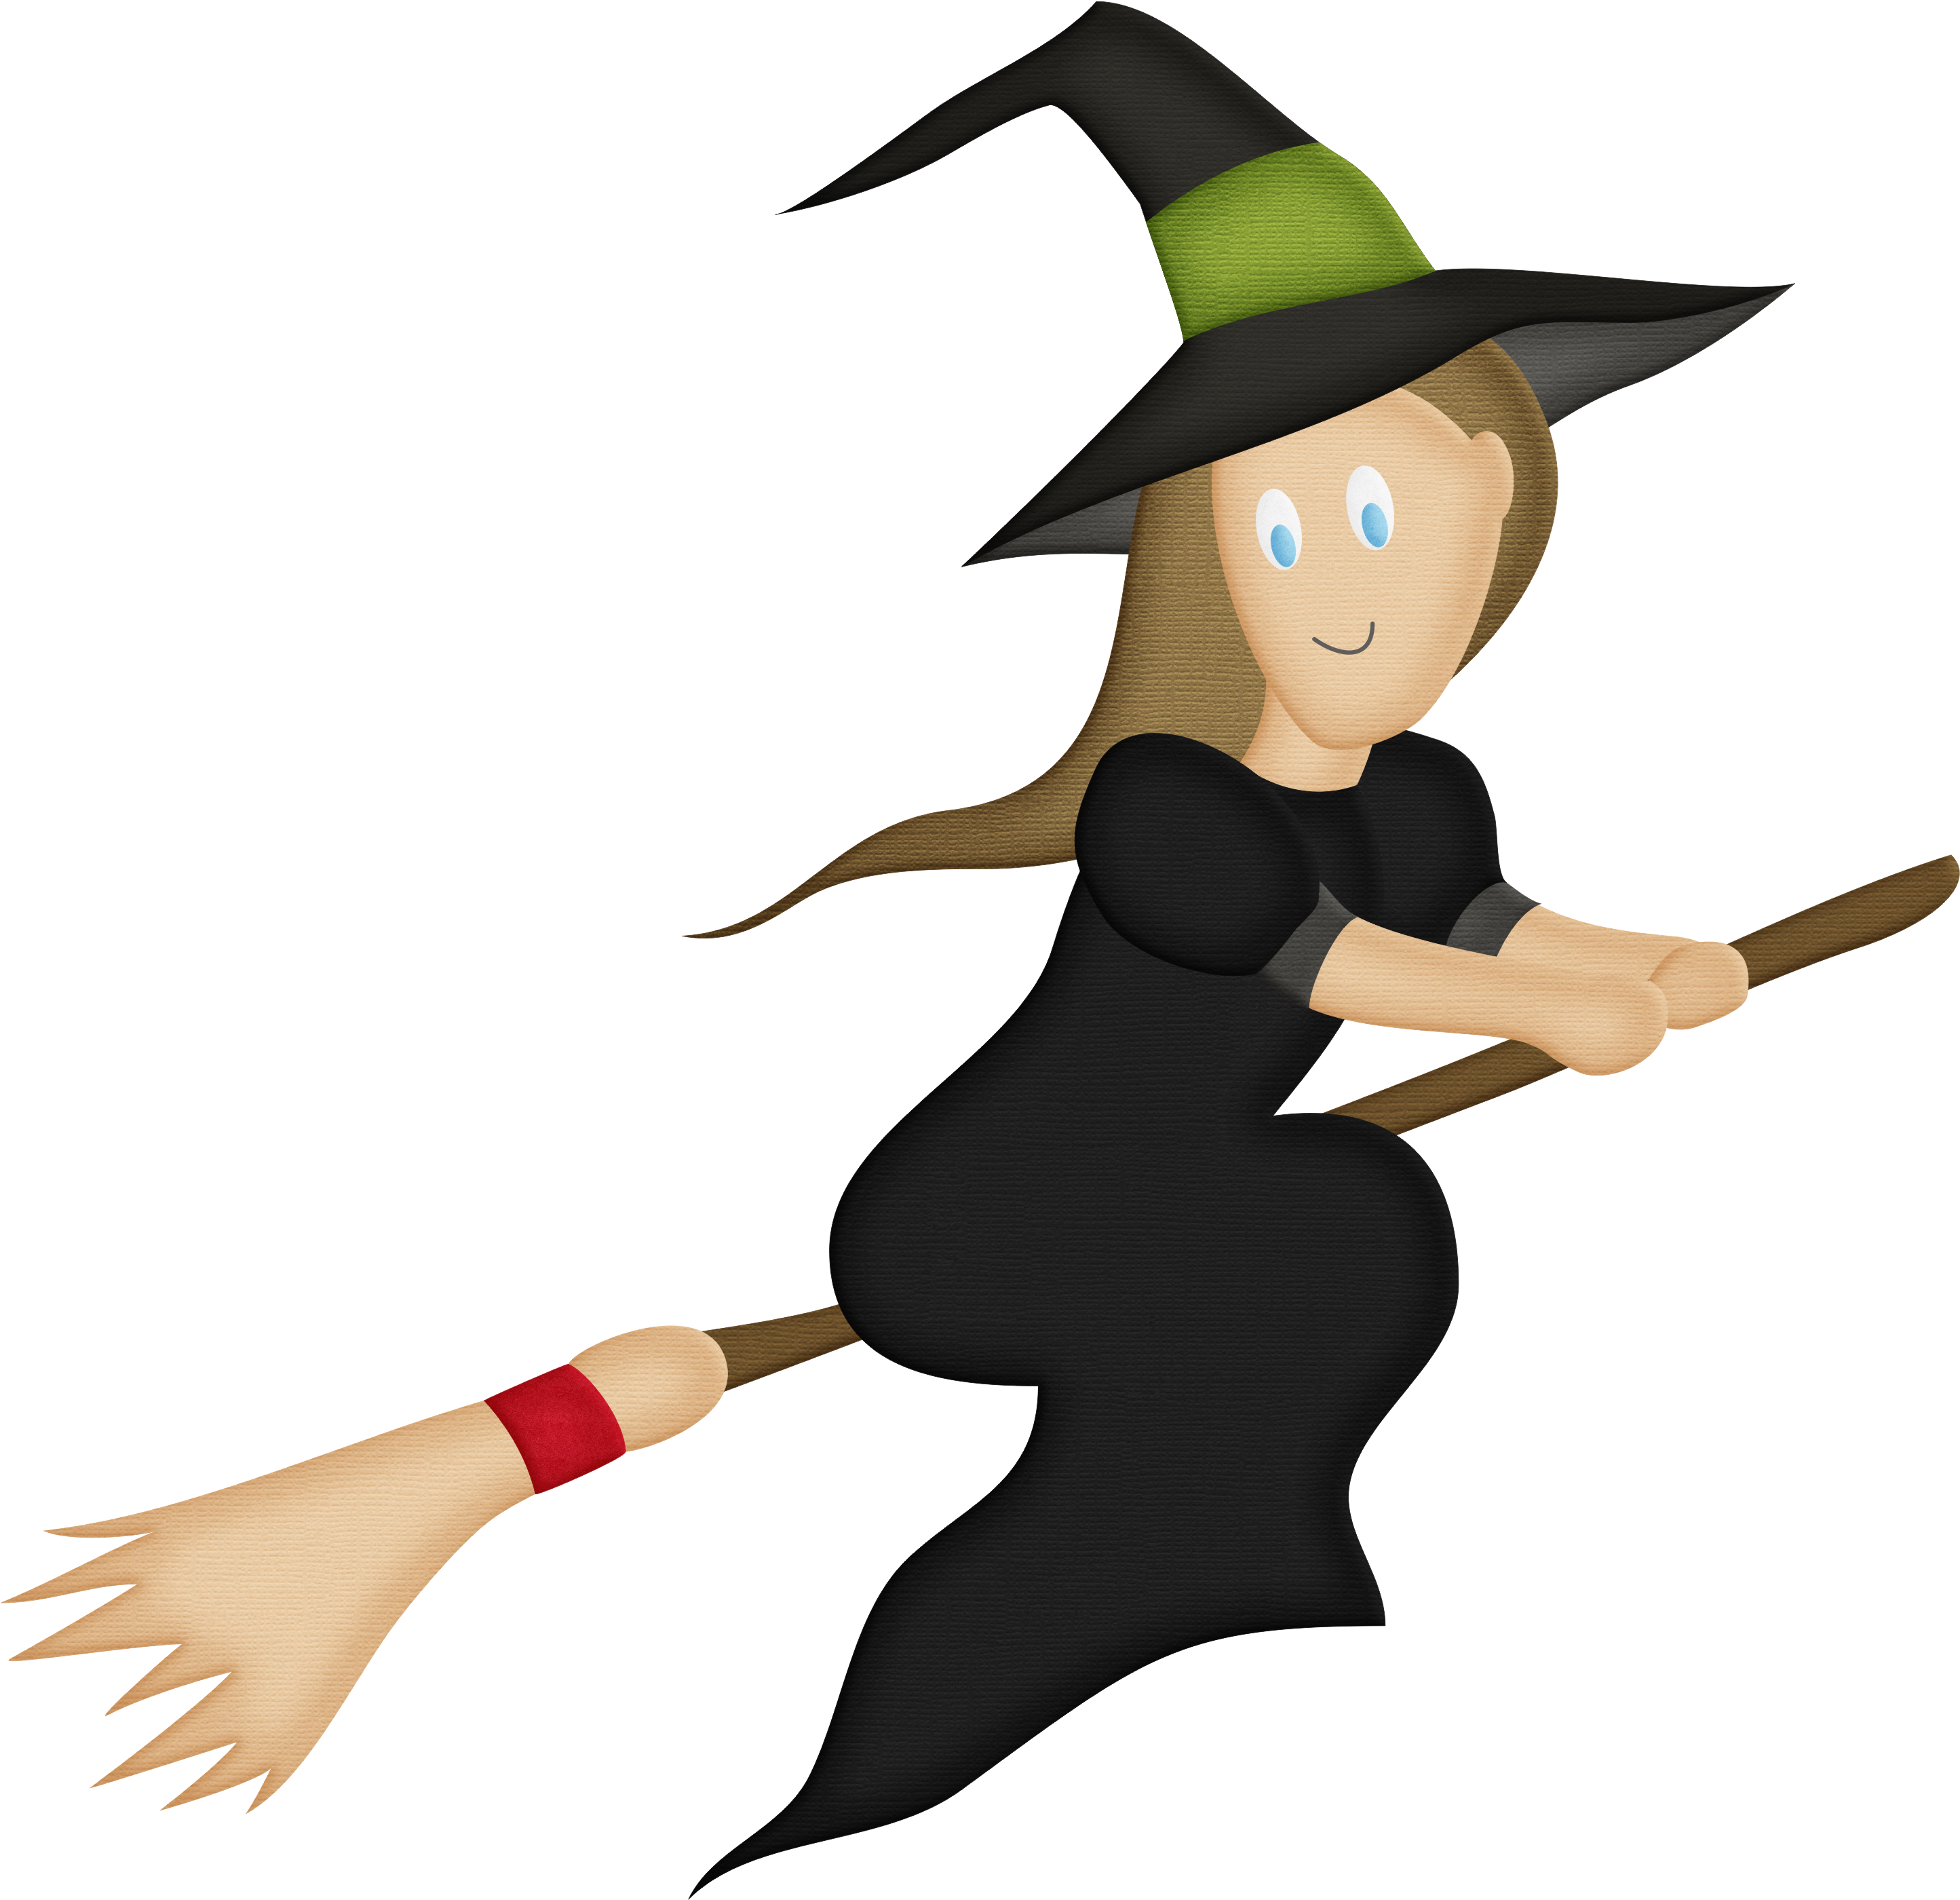 Witchs Broom Boszorkxe1ny Magic - 巫 婆 騎 掃 把 Clipart - Large Size Png Image ...